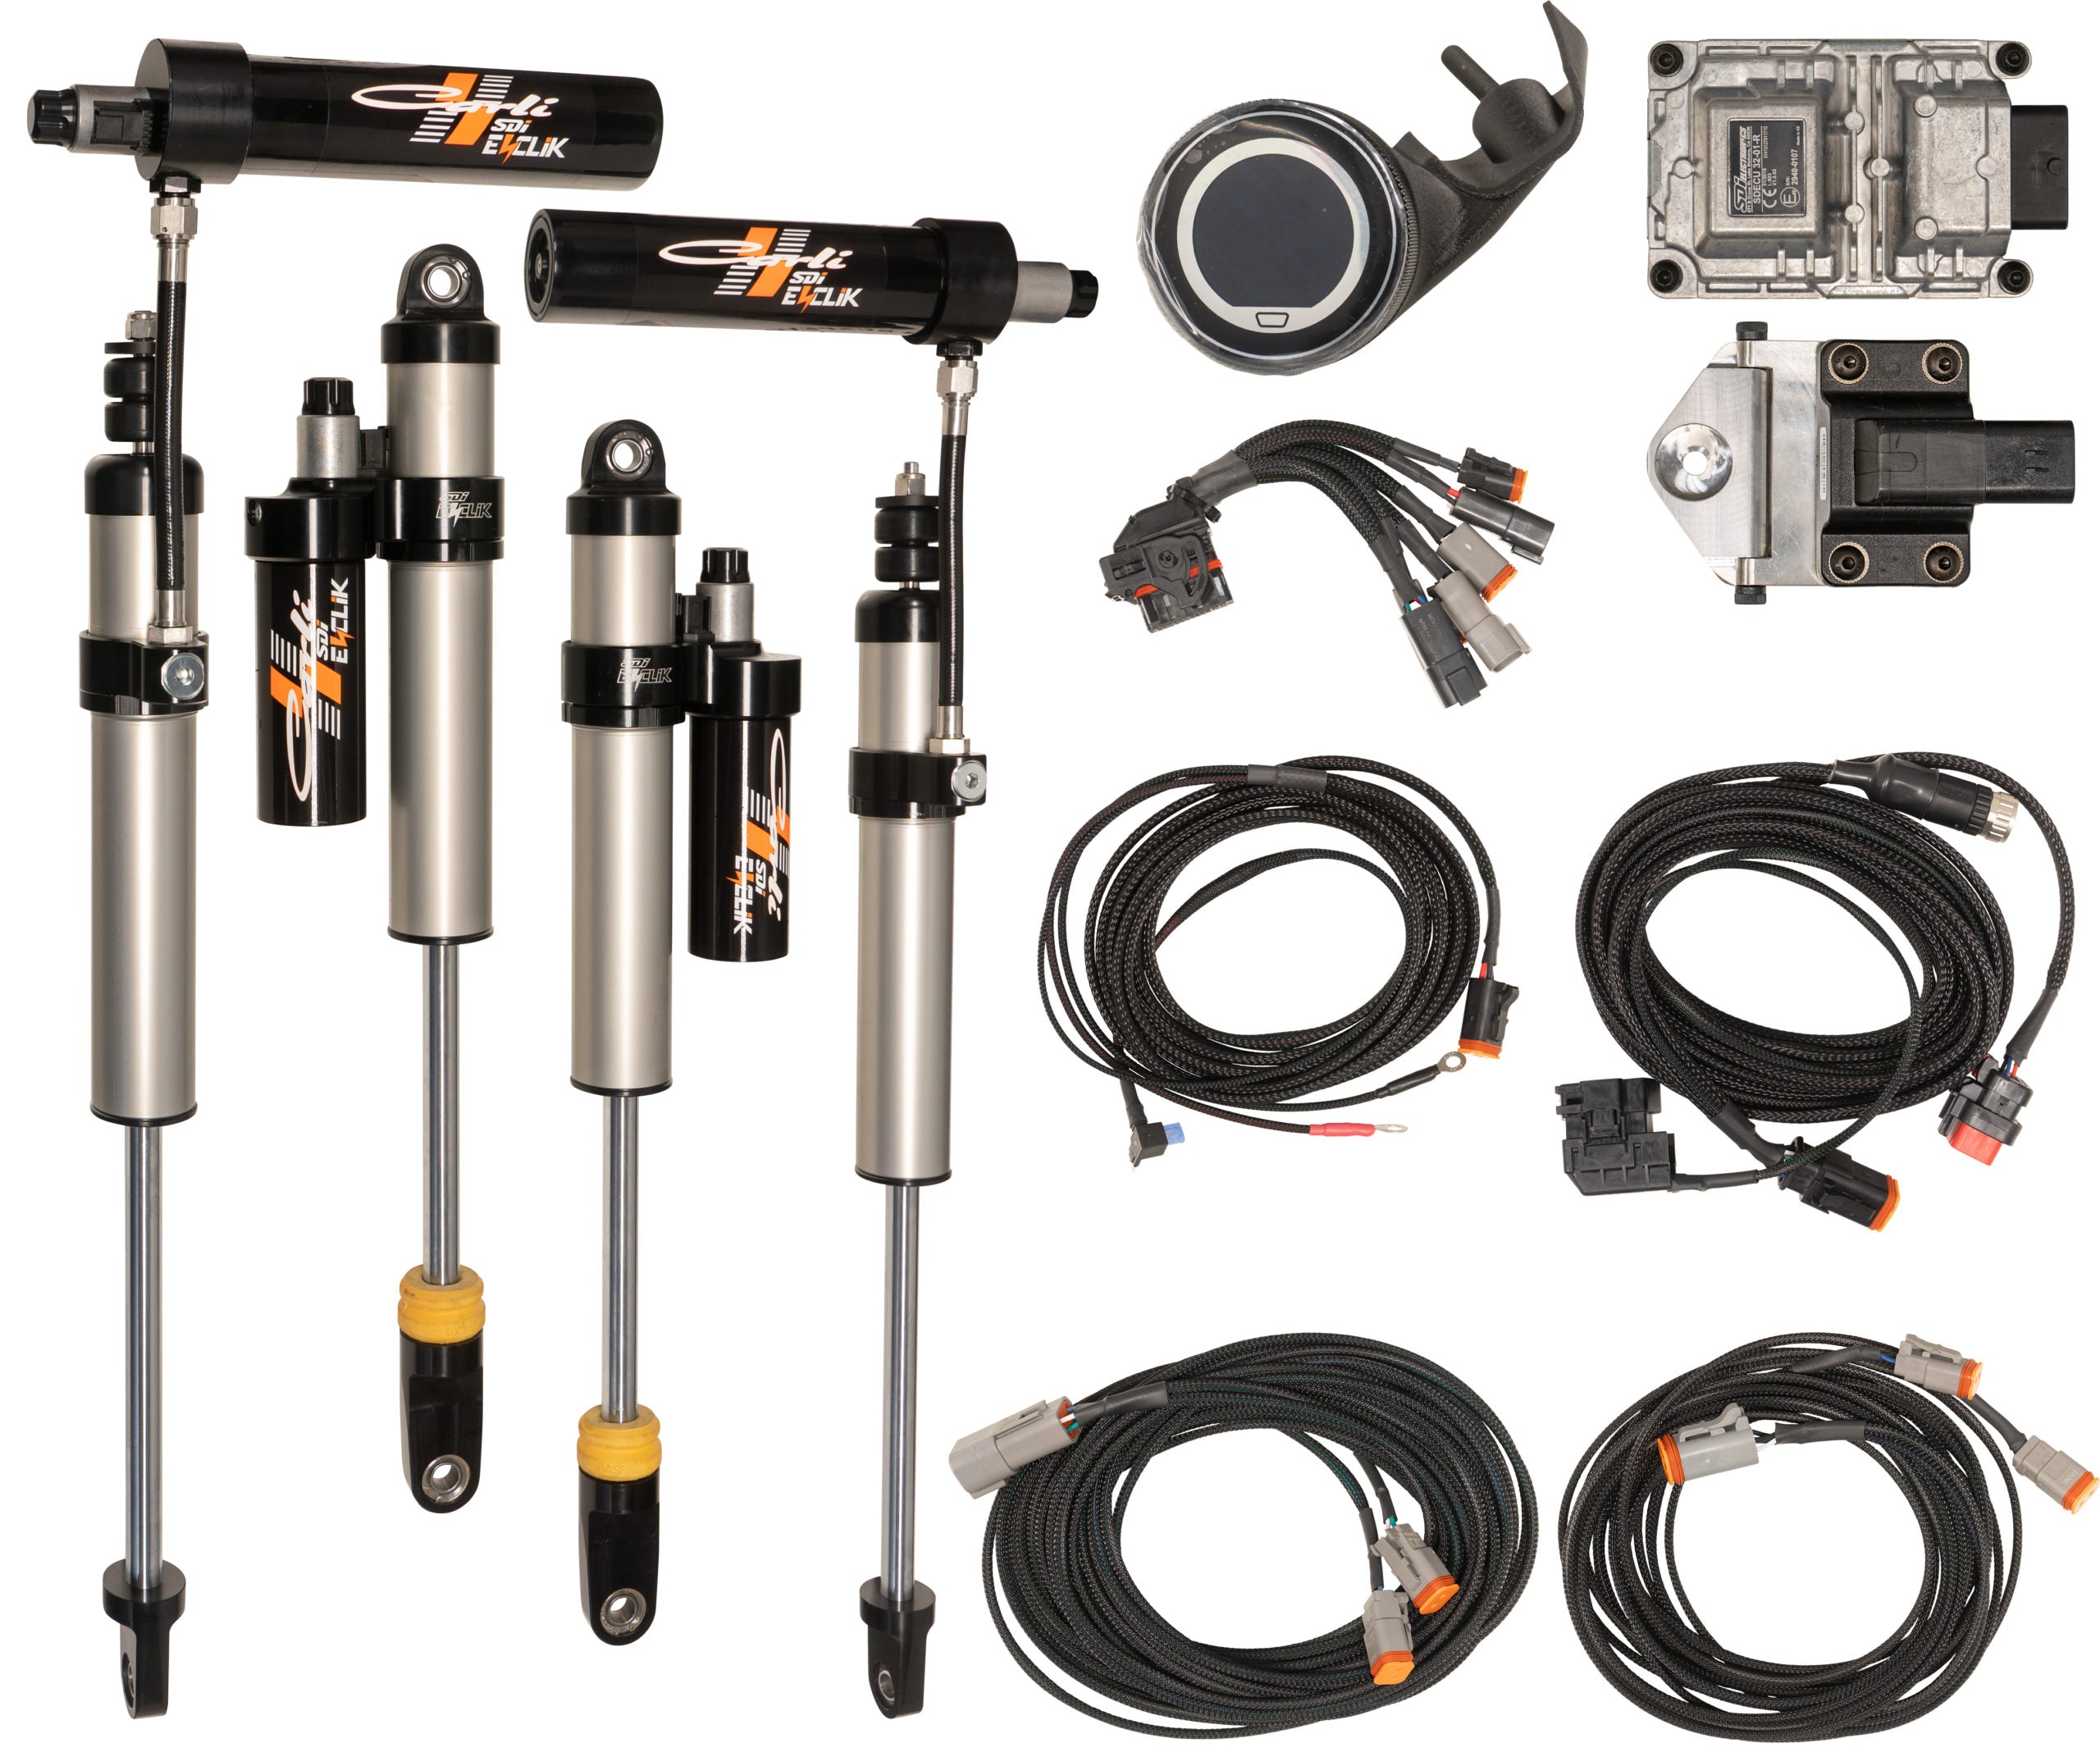 Carli Suspension CS-FEV25SPKG-LVL-17 Carli Eventure 2.5 inch RR 2.5 inch Lift Front and Rear Shock Pkg with Res Mounts